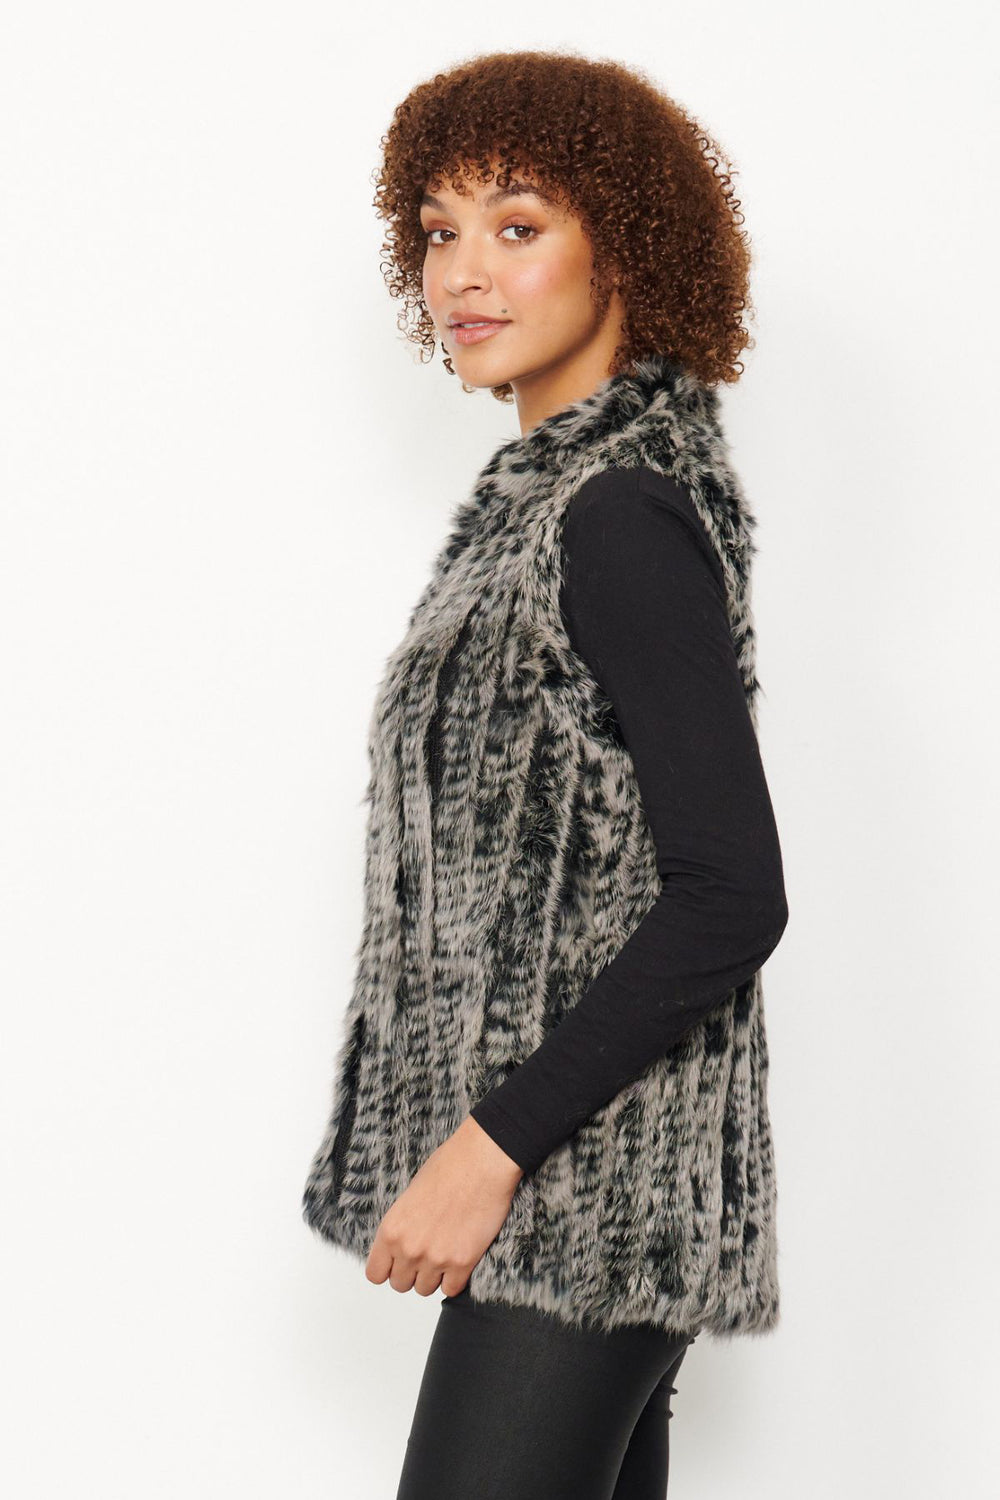 Absolute luxury the Jessica Vest by designer Caju is a bold and beautiful piece.